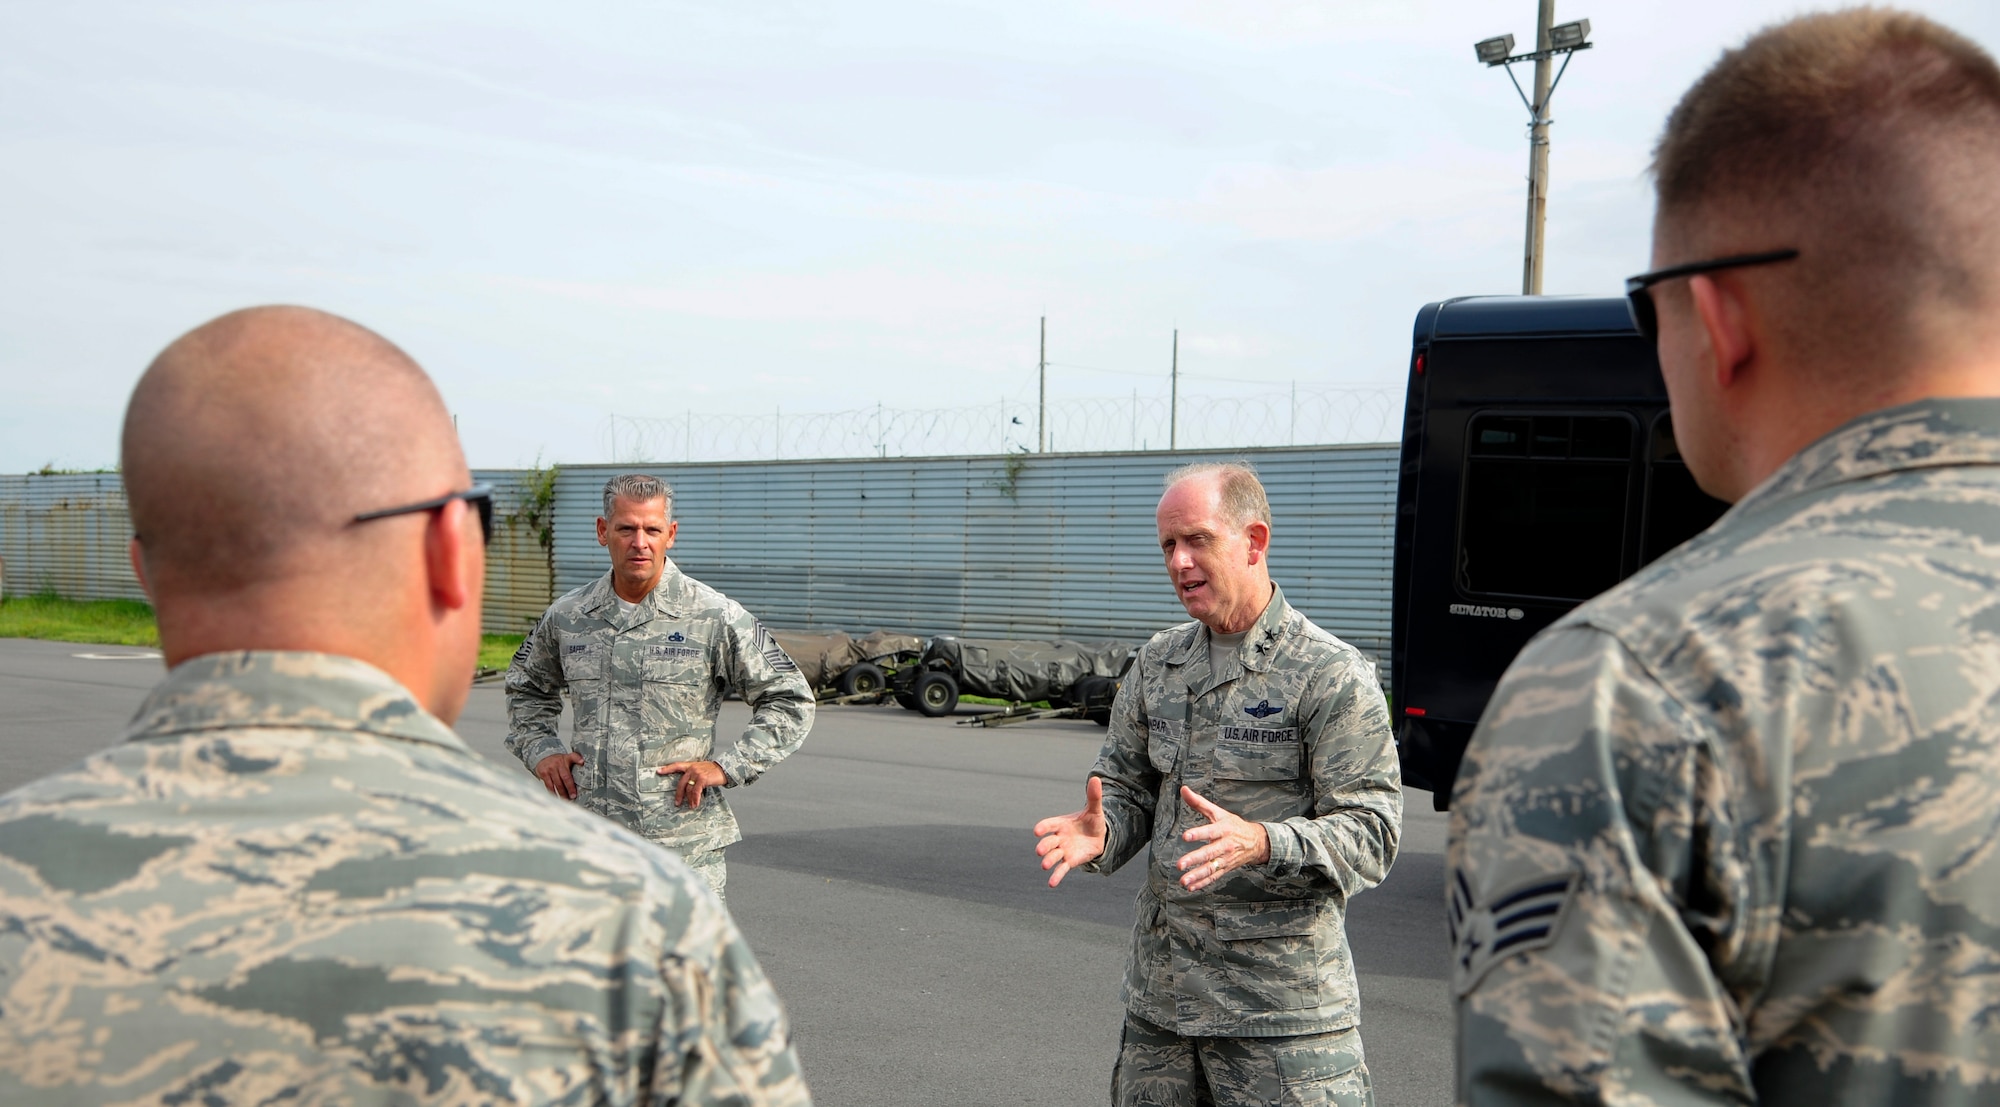 U.S. Air Force Maj. Gen. Donald Dunbar, Wisconsin’s adjutant general, briefs a group of Airmen from the 176th Air Expeditionary Maintenance Unit at Kunsan Air Base, Republic of Korea, Sept. 15, 2017. Airmen from the 115th Fighter Wing, Wisconsin Air National Guard, are deployed to Kunsan for a 4-month rotation as part of a Theater Security Package, which helps to maintain a deterrent against threats to regional security and stability. Dunbar visited Kunsan to see how the Airmen from the 115th FW help enhance 8th FW Airmen’s ability to defend the base, accept follow-on forces and take the fight north. (U.S. Air Force photo by Senior Airman Colby L. Hardin)